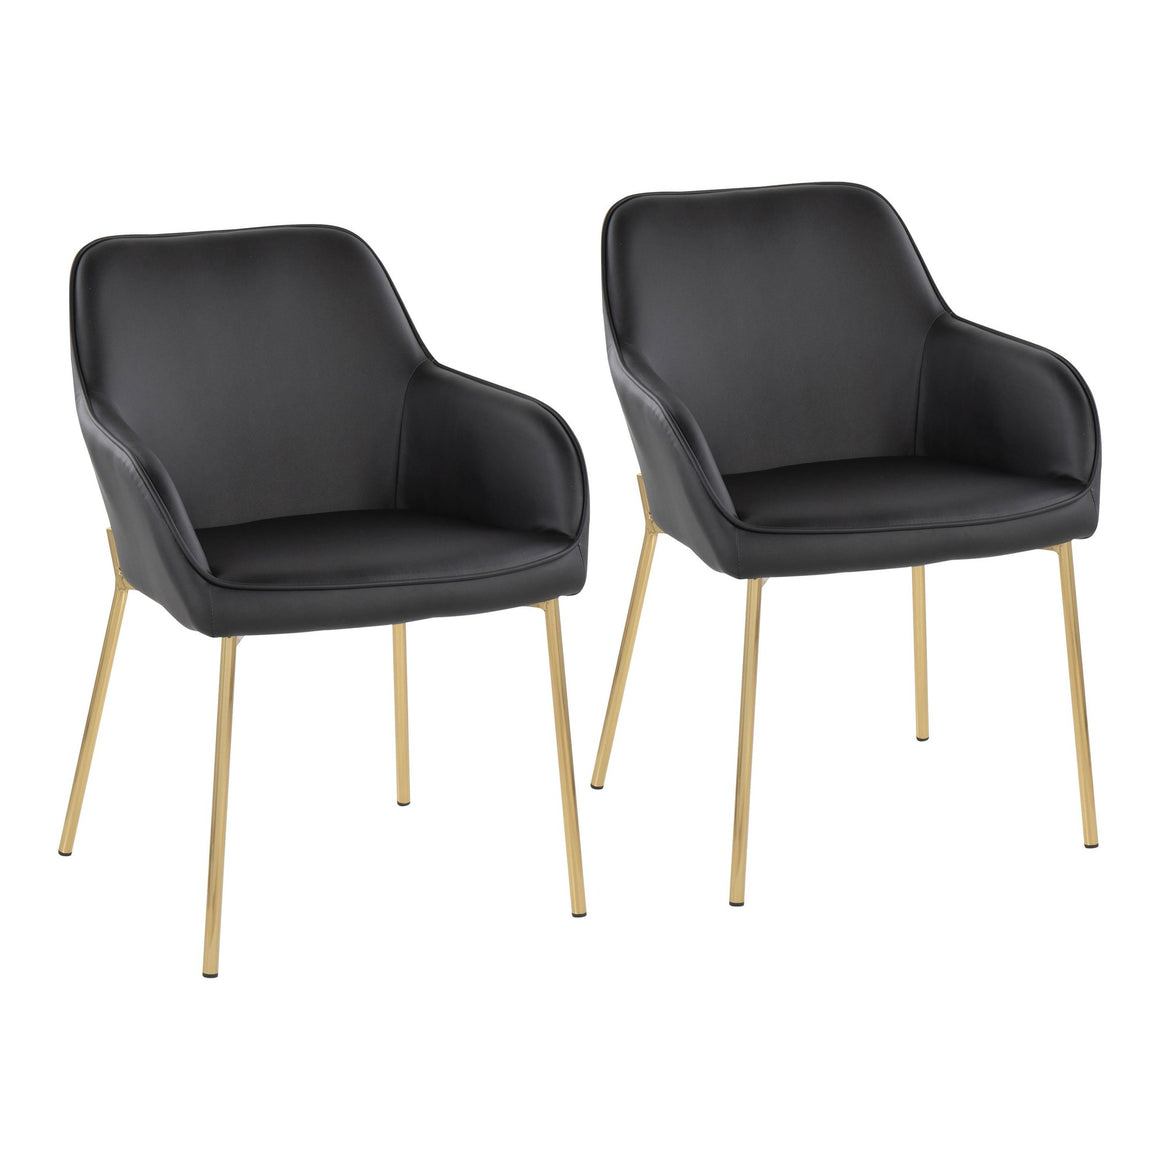 Daniella Contemporary Dining Chair in Gold Steel and Black Faux Leather by LumiSource - Set of 2